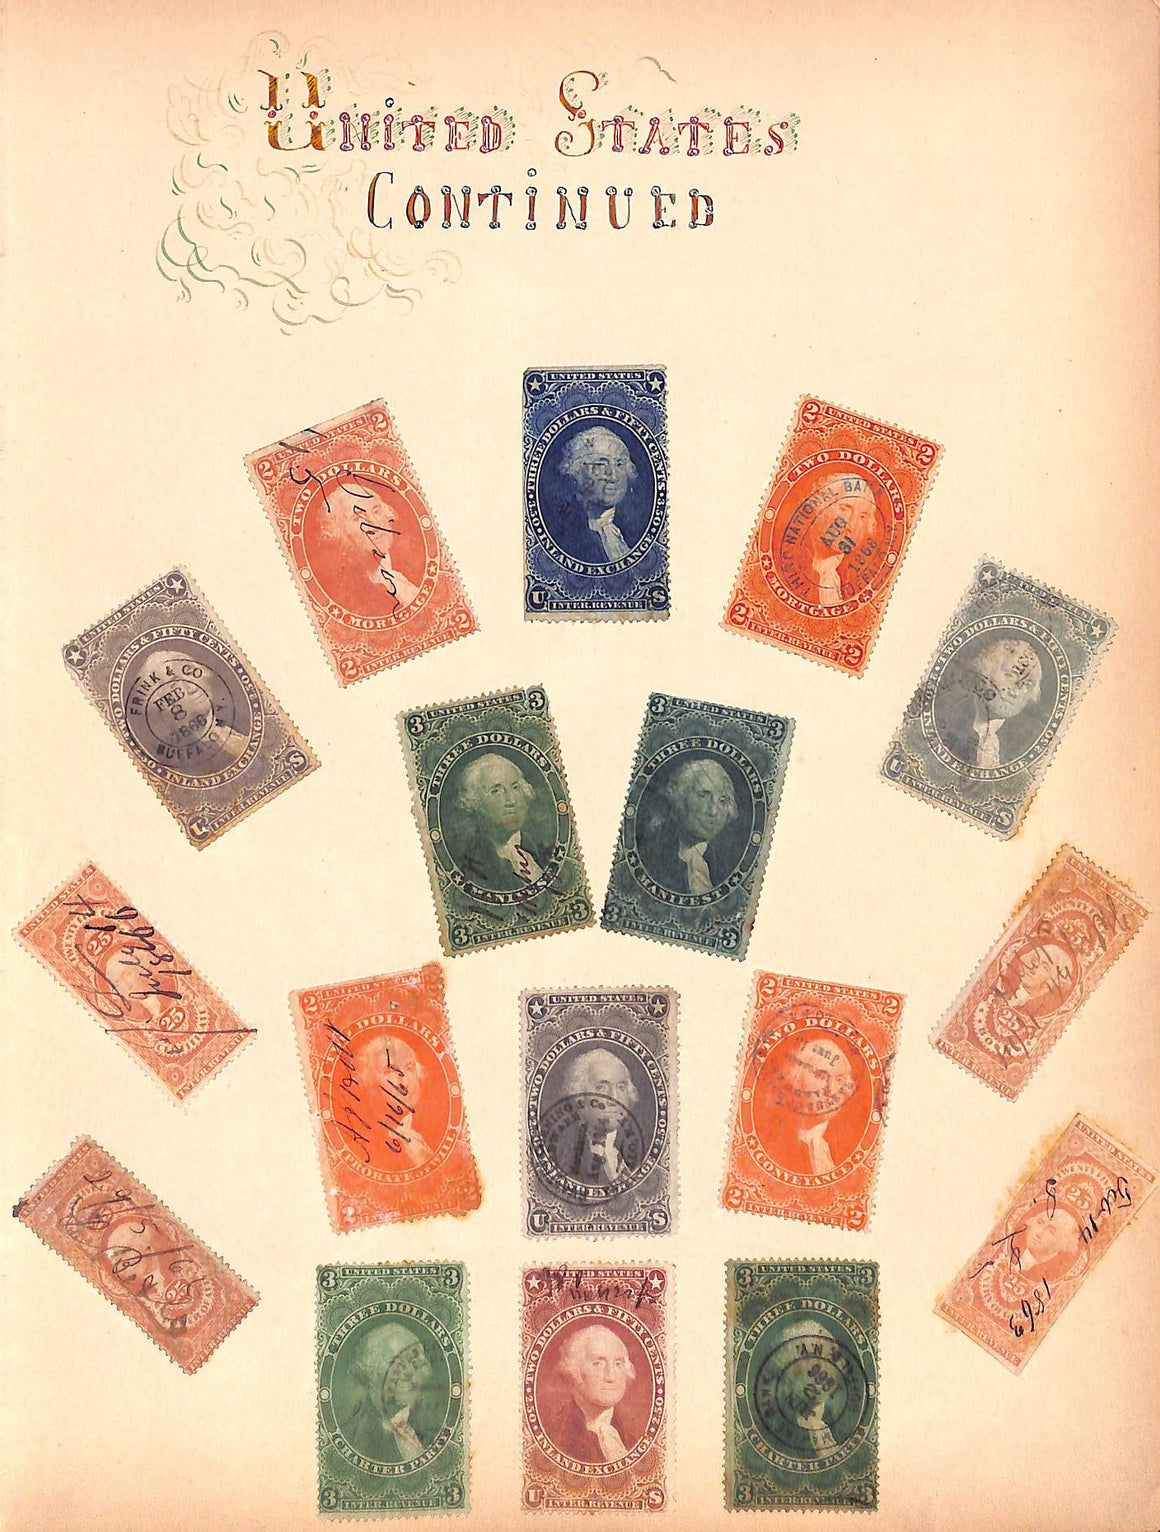 US Postage Stamps